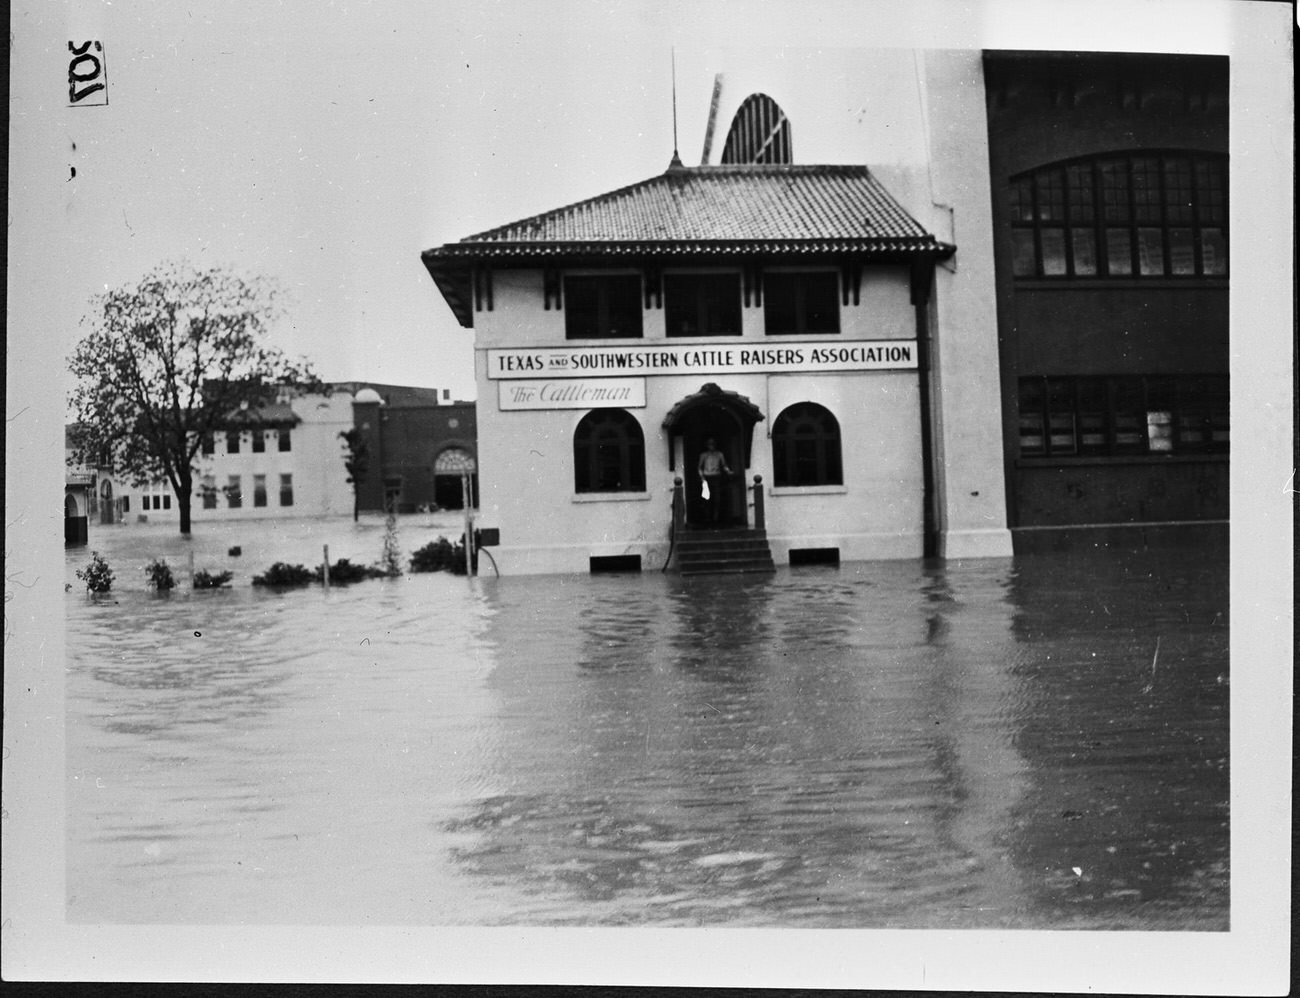 The Fort Worth Stockyards after a flood. A building has water coming up the front steps. A person is standing at the top of the steps